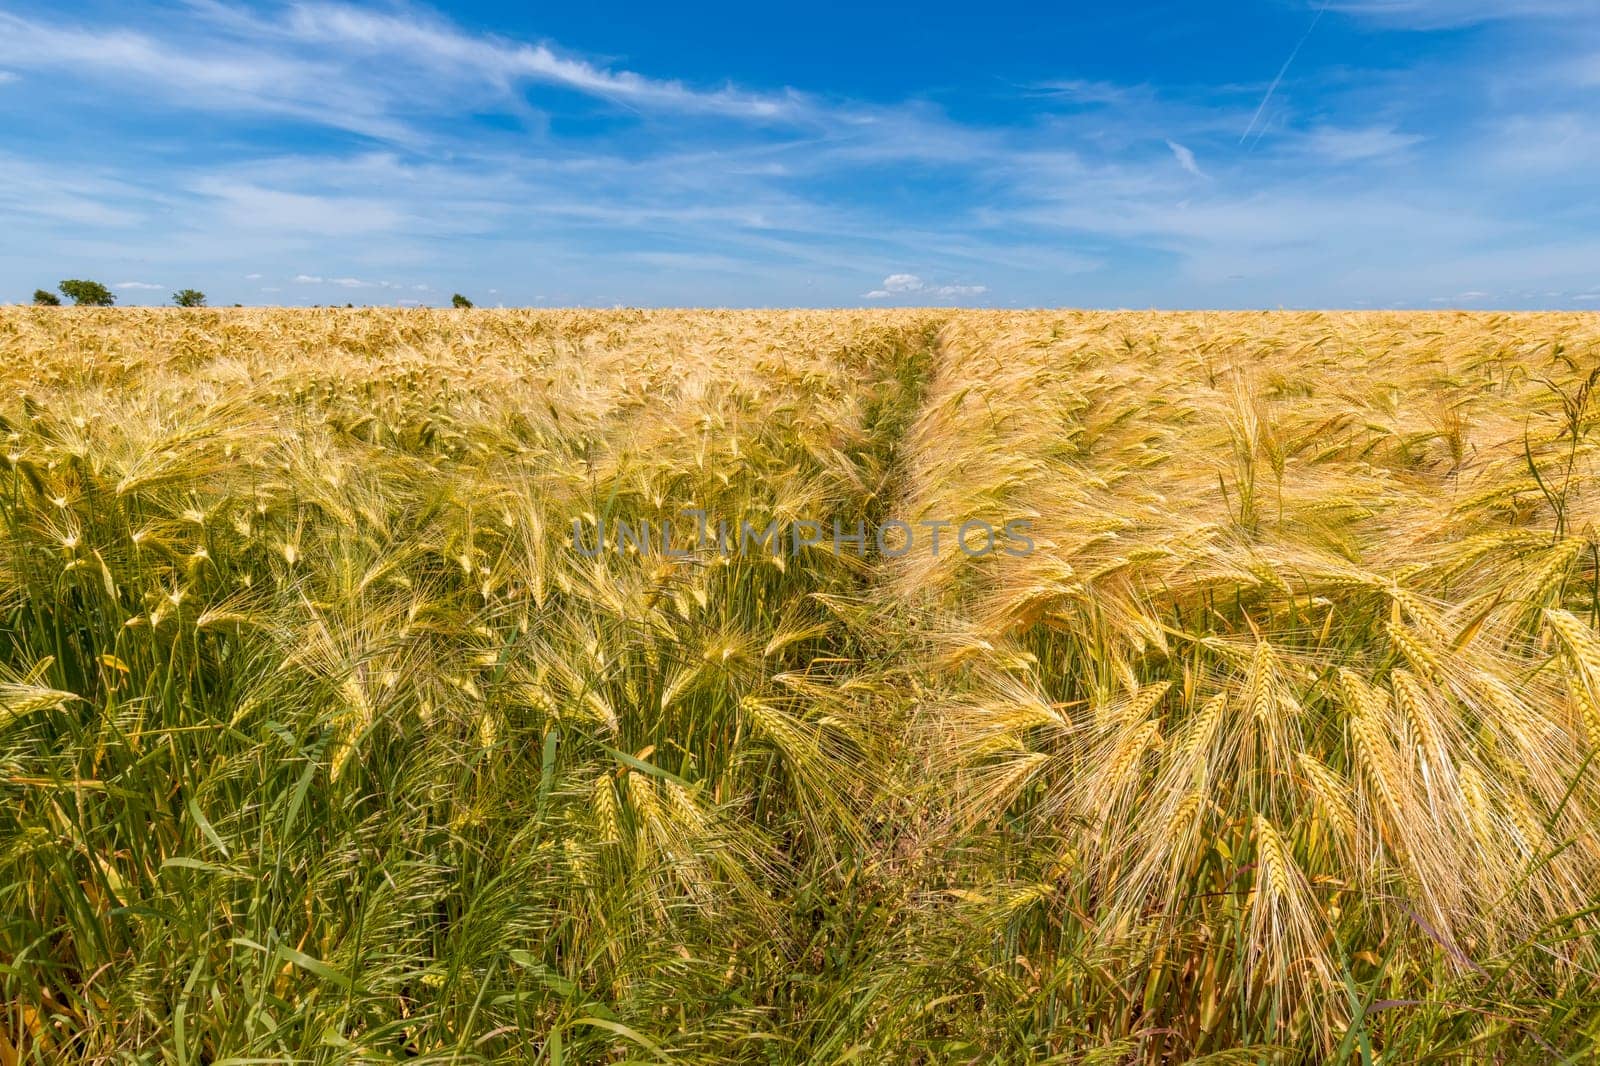 Ears of wheat, the golden ripe field of wheat by EdVal